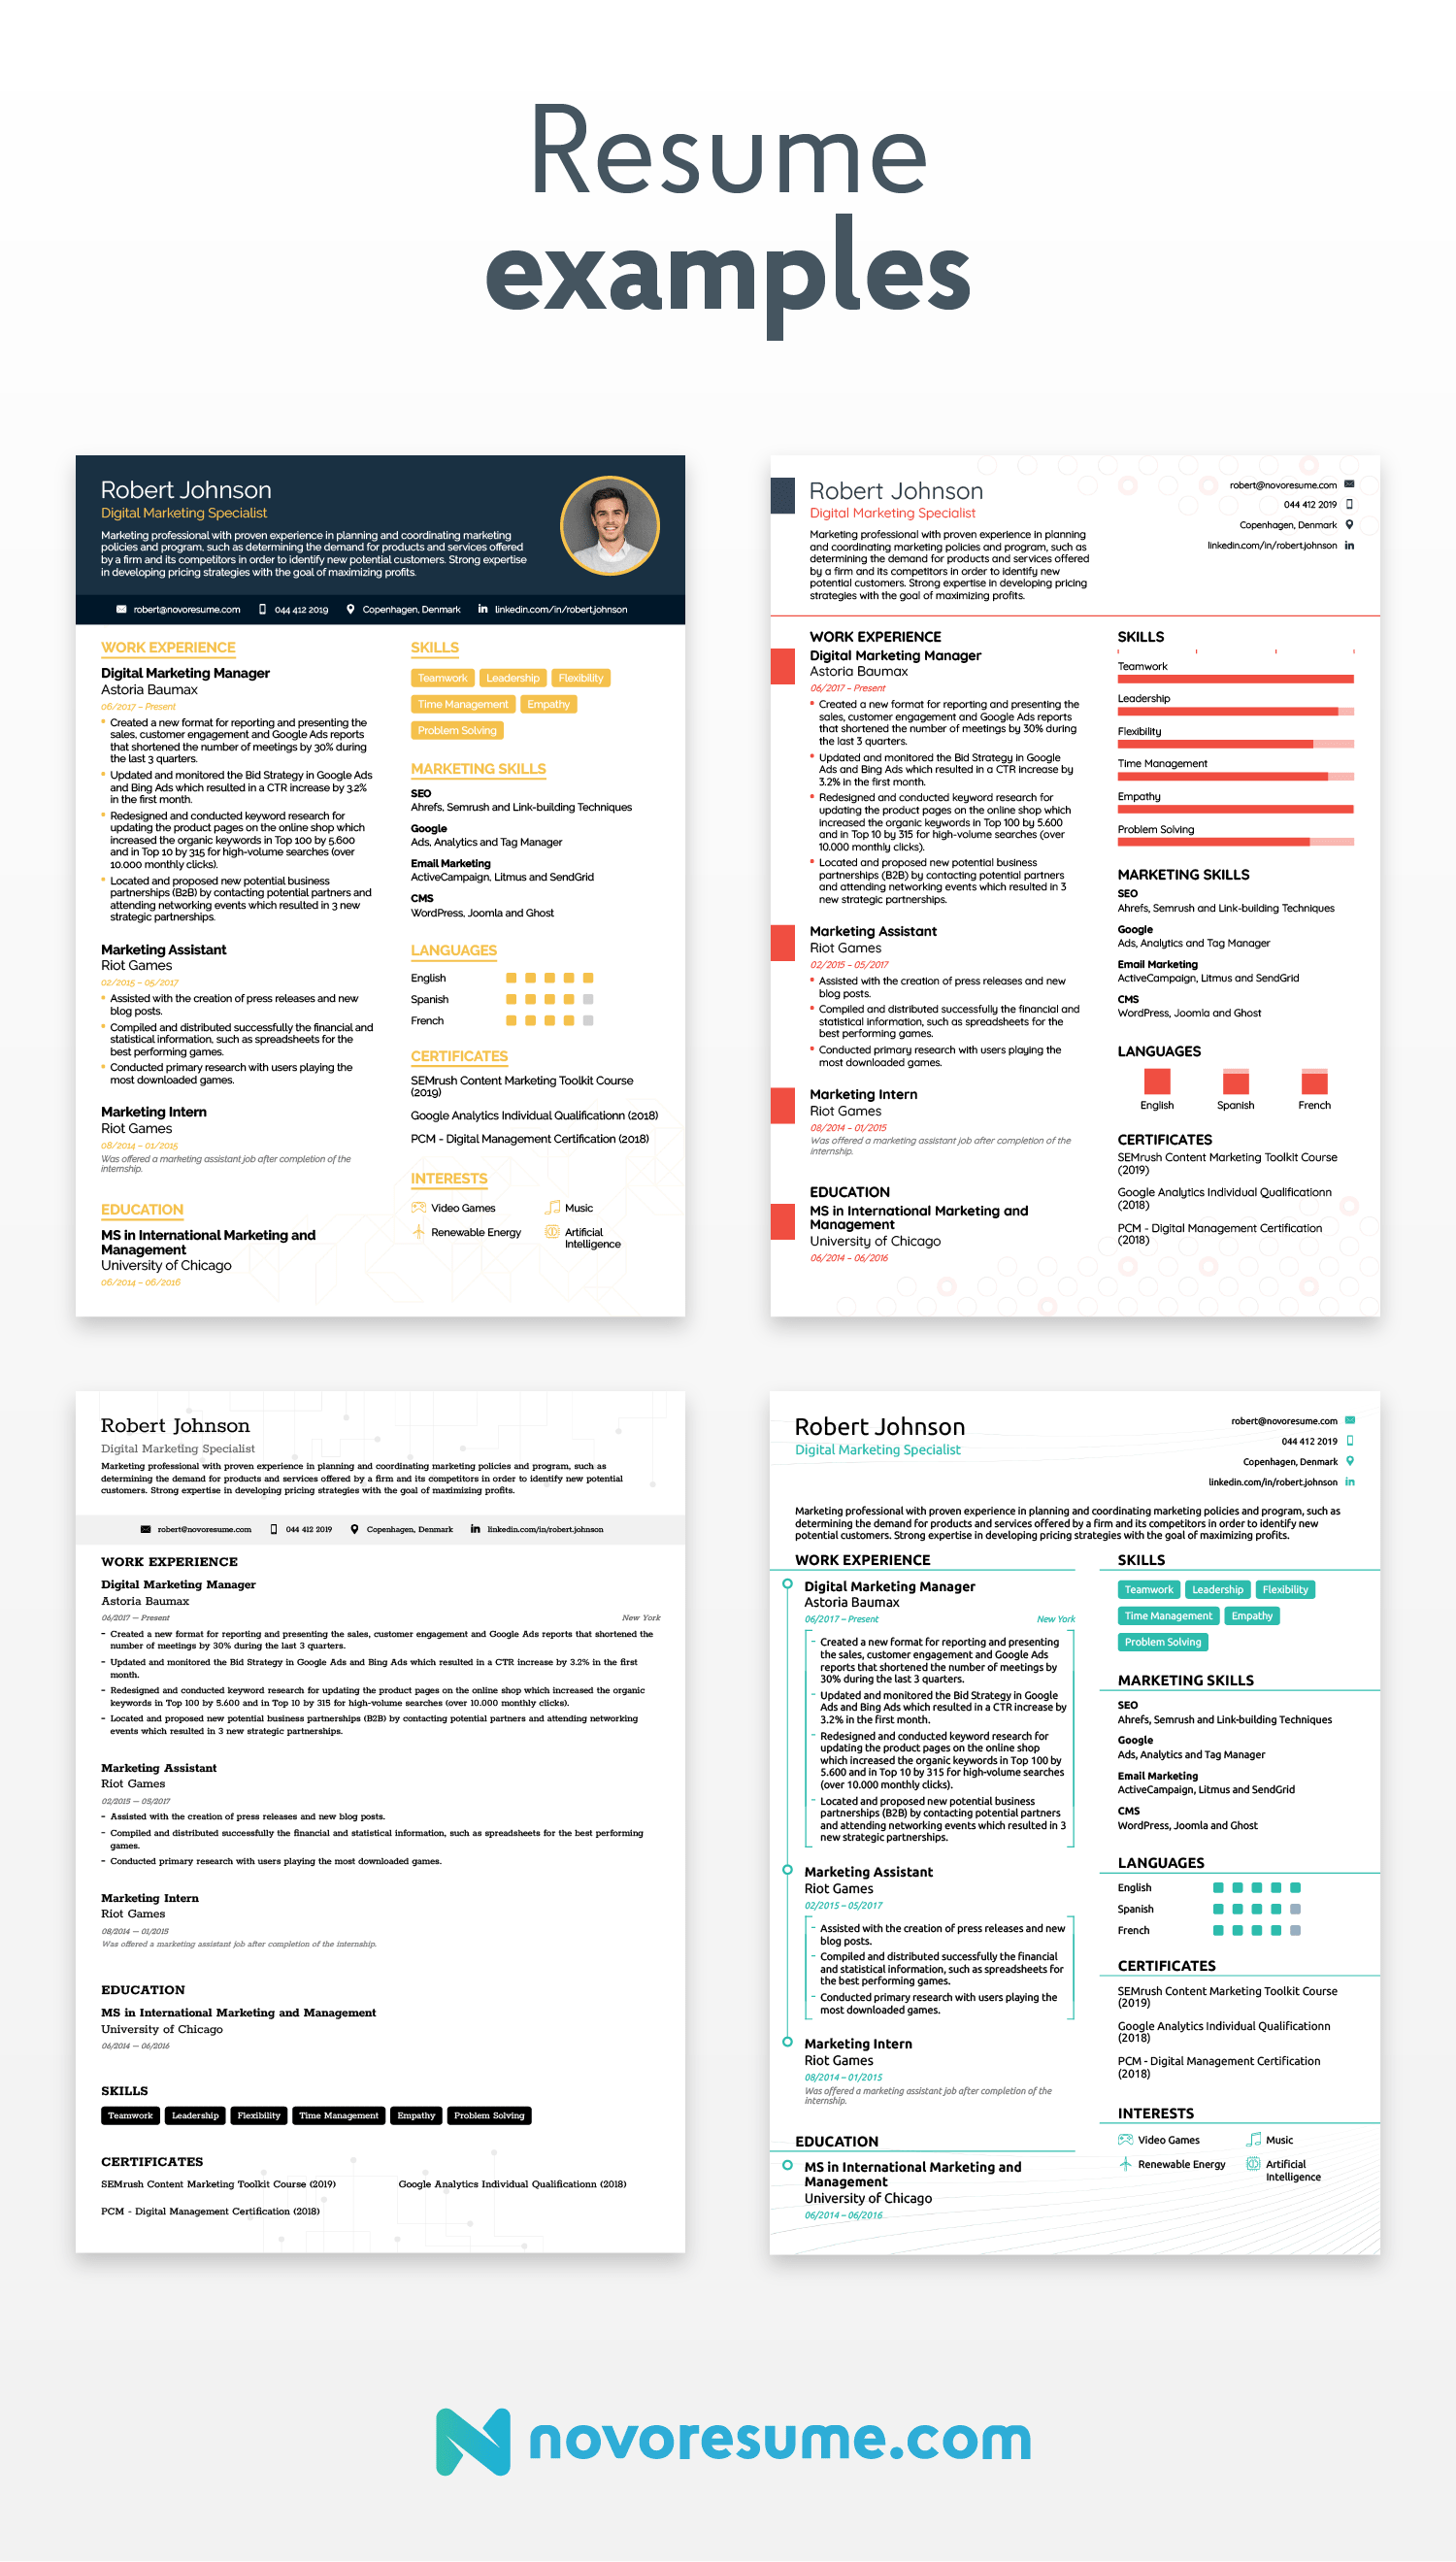 resume examples for job hunt